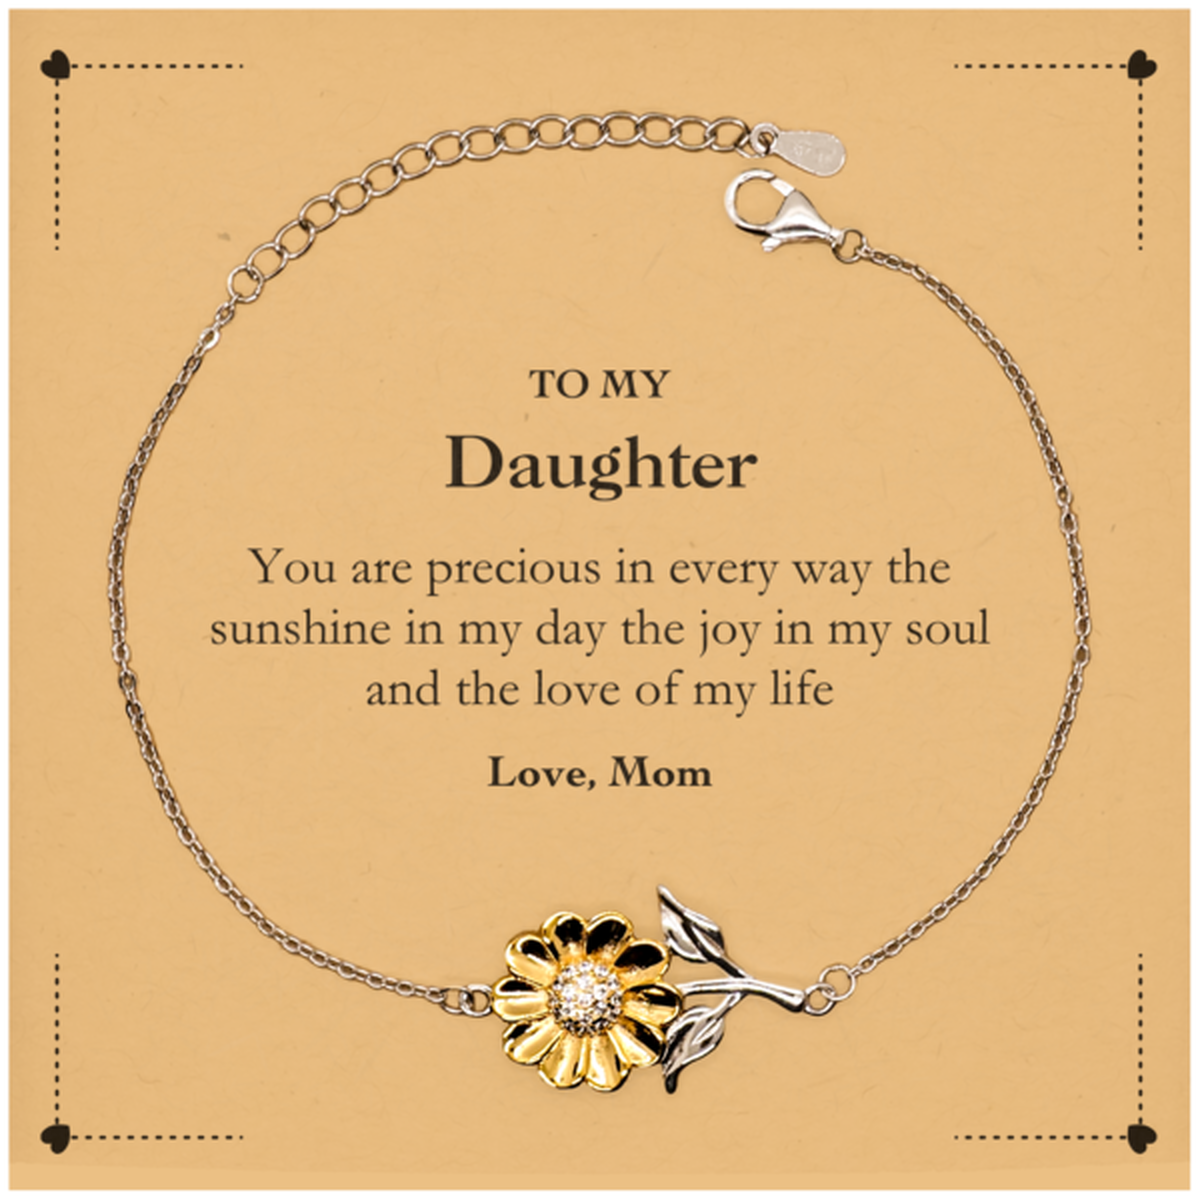 Graduation Gifts for Daughter Sunflower Bracelet Present from Mom, Christmas Daughter Birthday Gifts Daughter You are precious in every way the sunshine in my day. Love, Mom